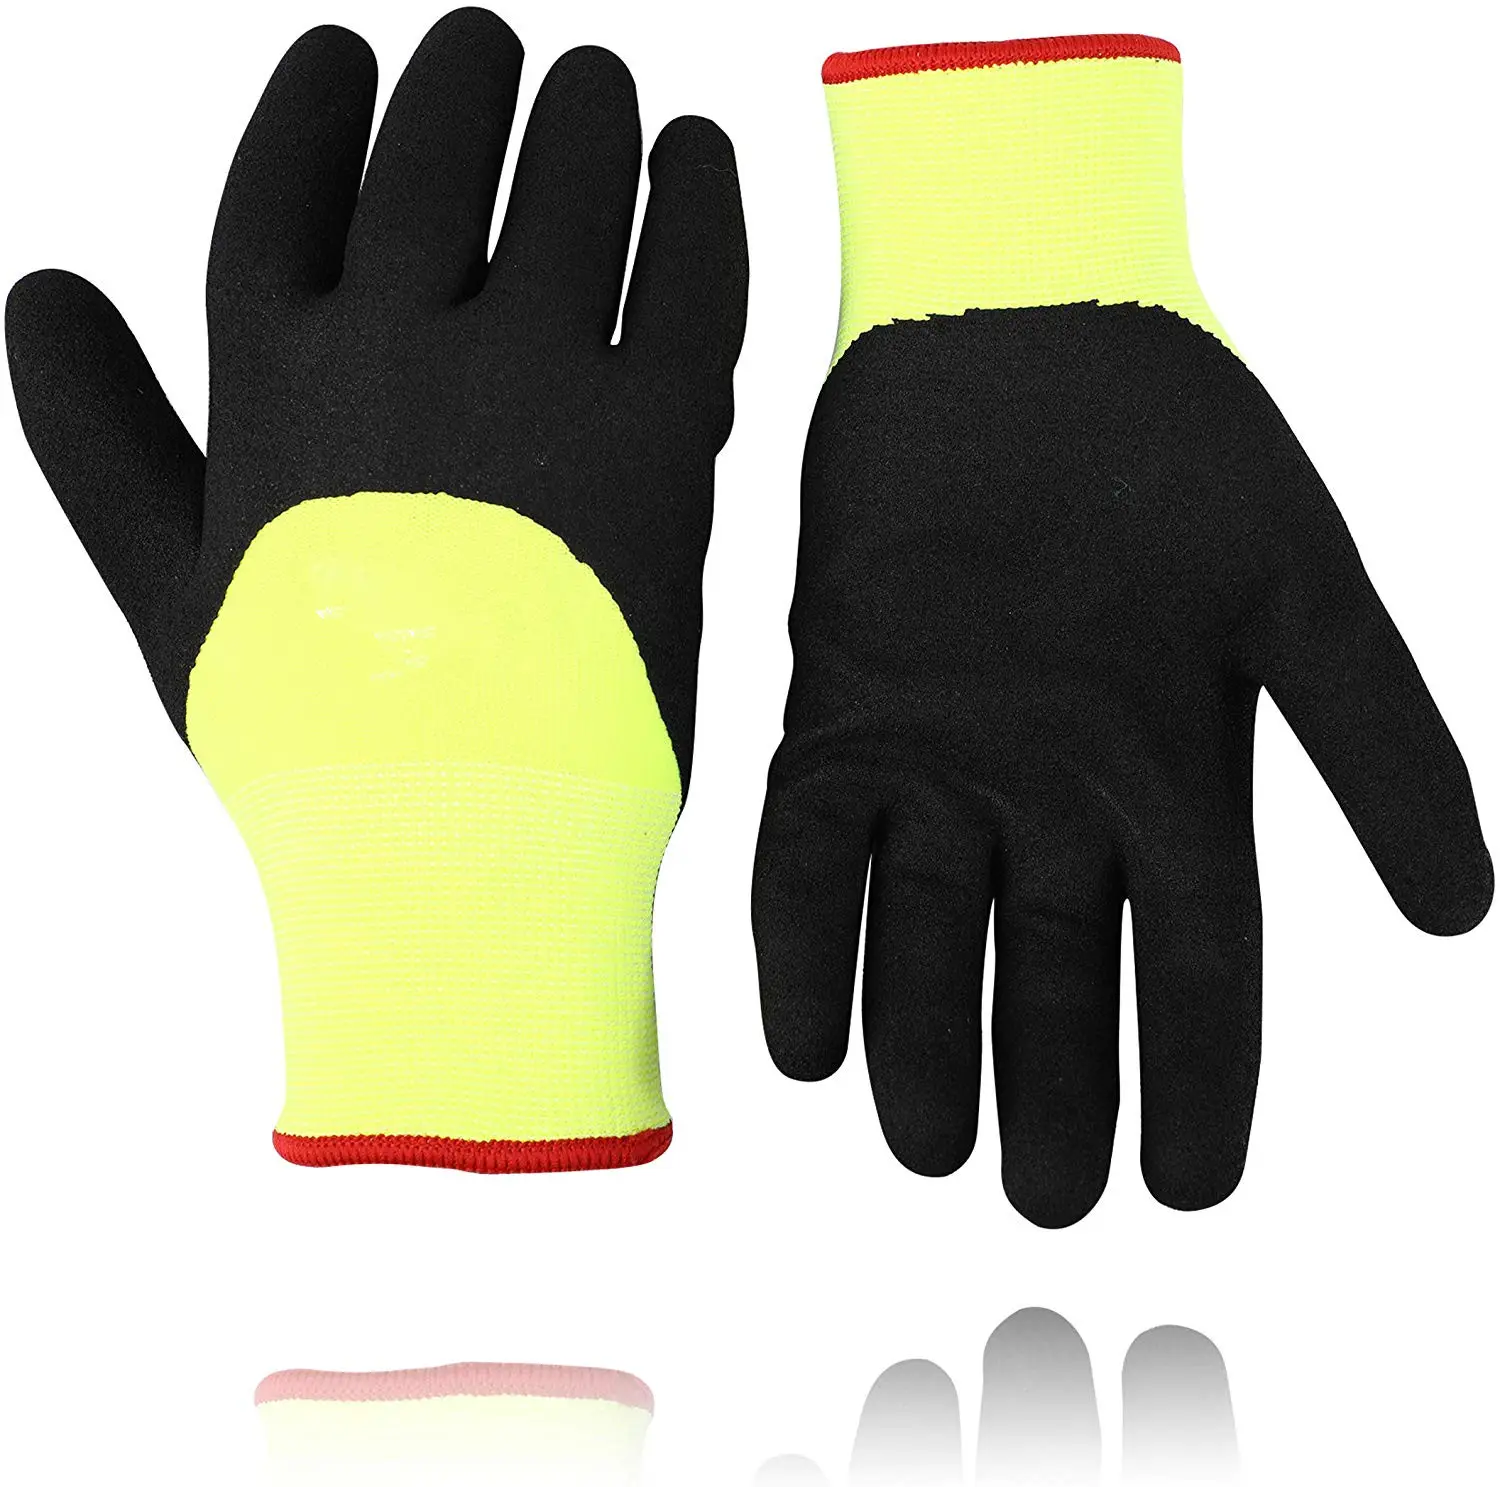 Firm Grip 3/4 Coated Winter Thermal Gloves Sandy Nitrile Coated Double Layer Insulated Work Gloves Warm Terry Loop Gloves